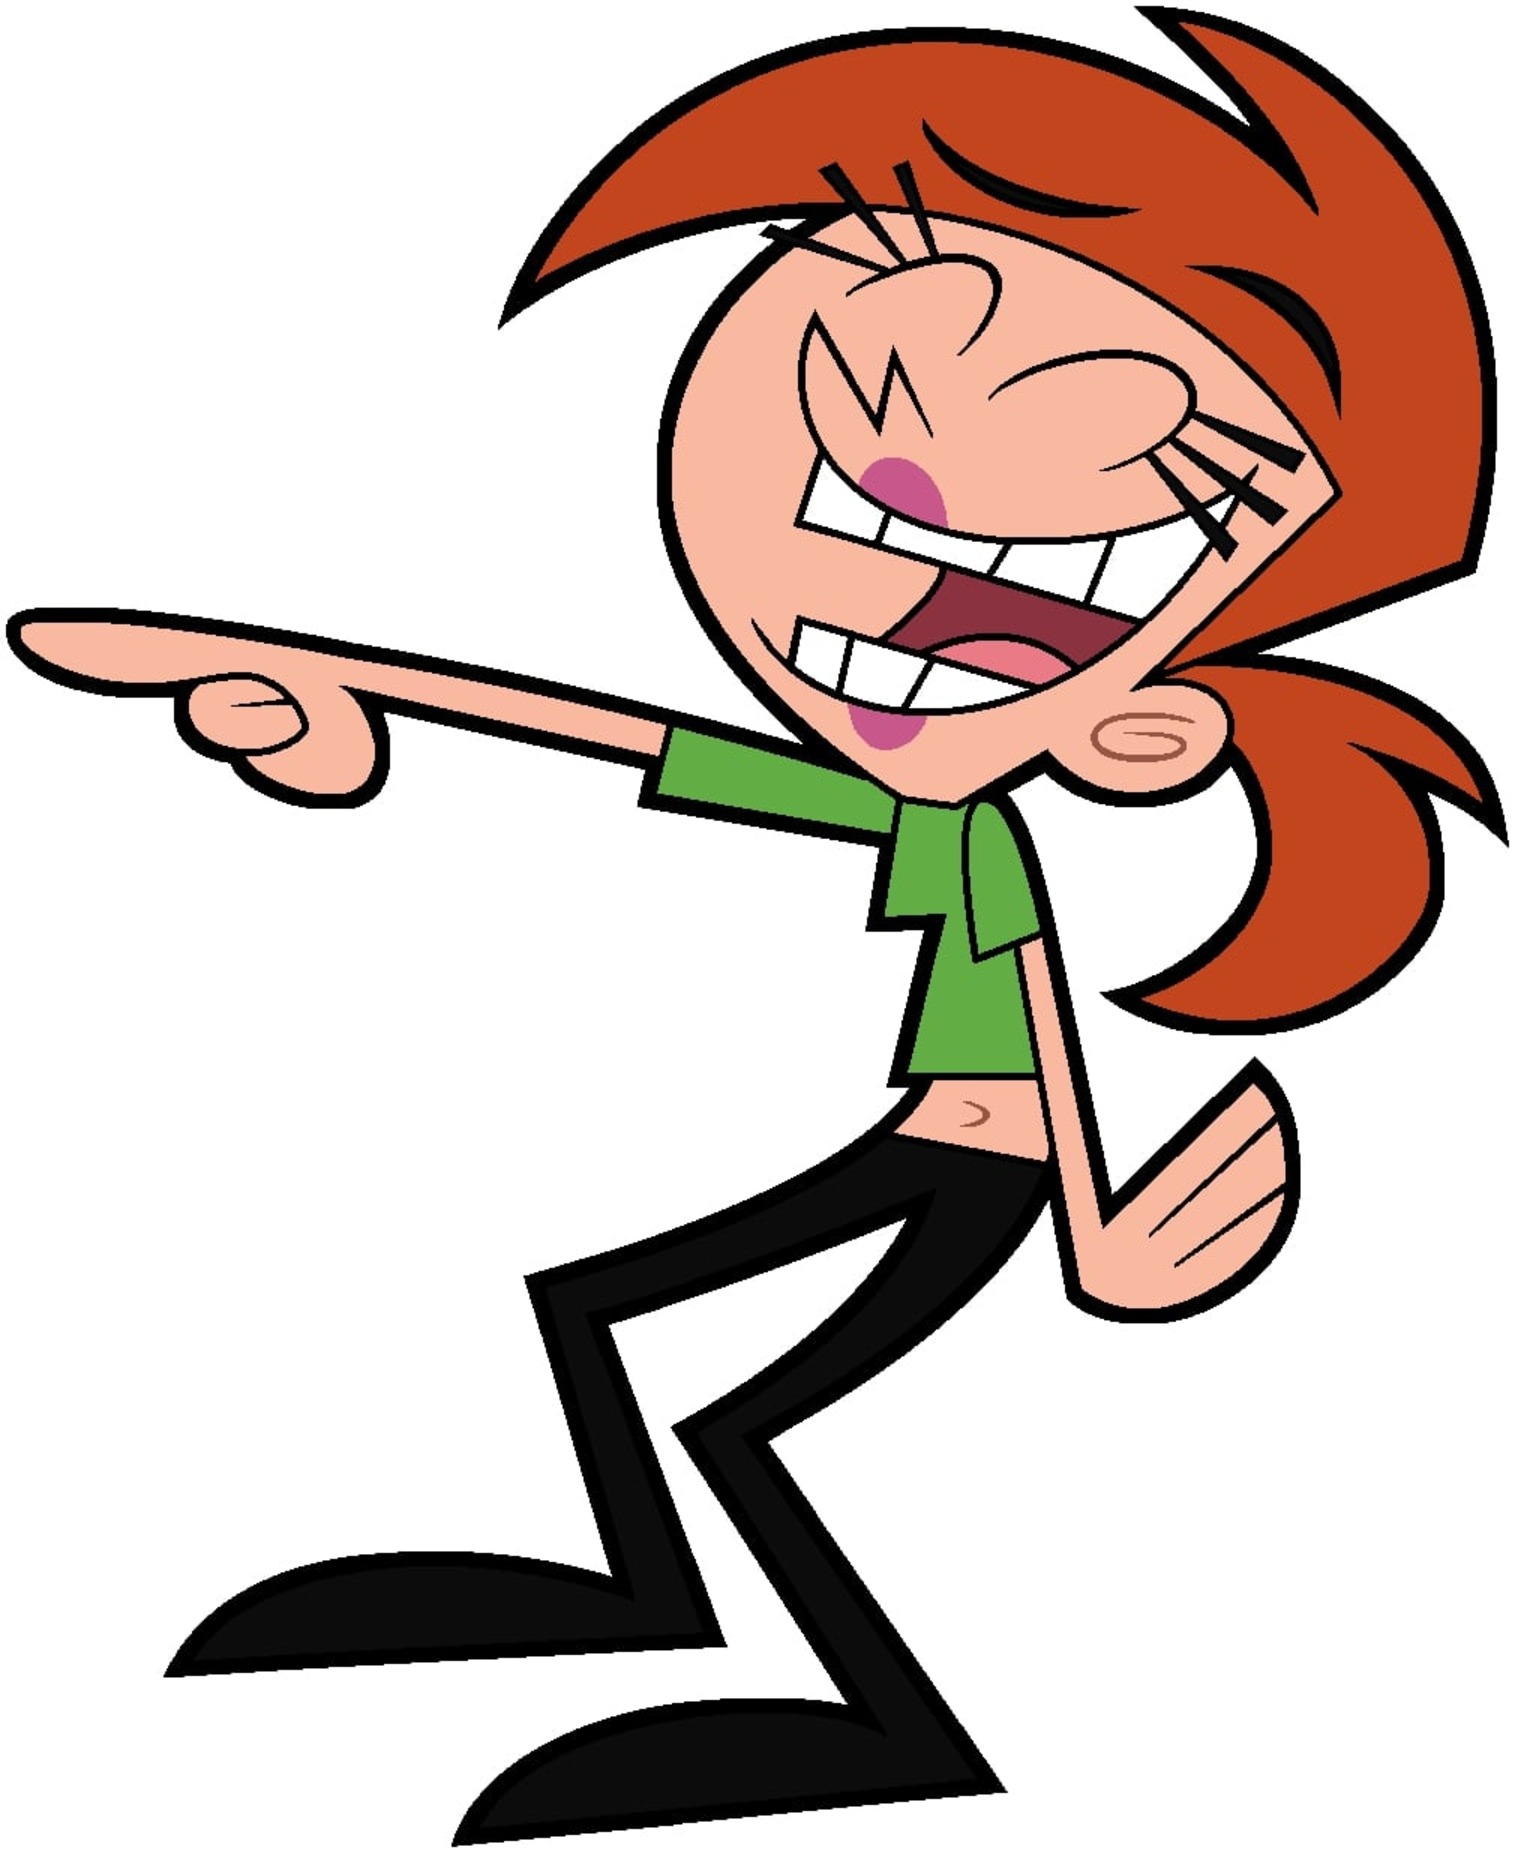 High Quality Vicky from Fairly Odd Parents Laughing Blank Meme Template